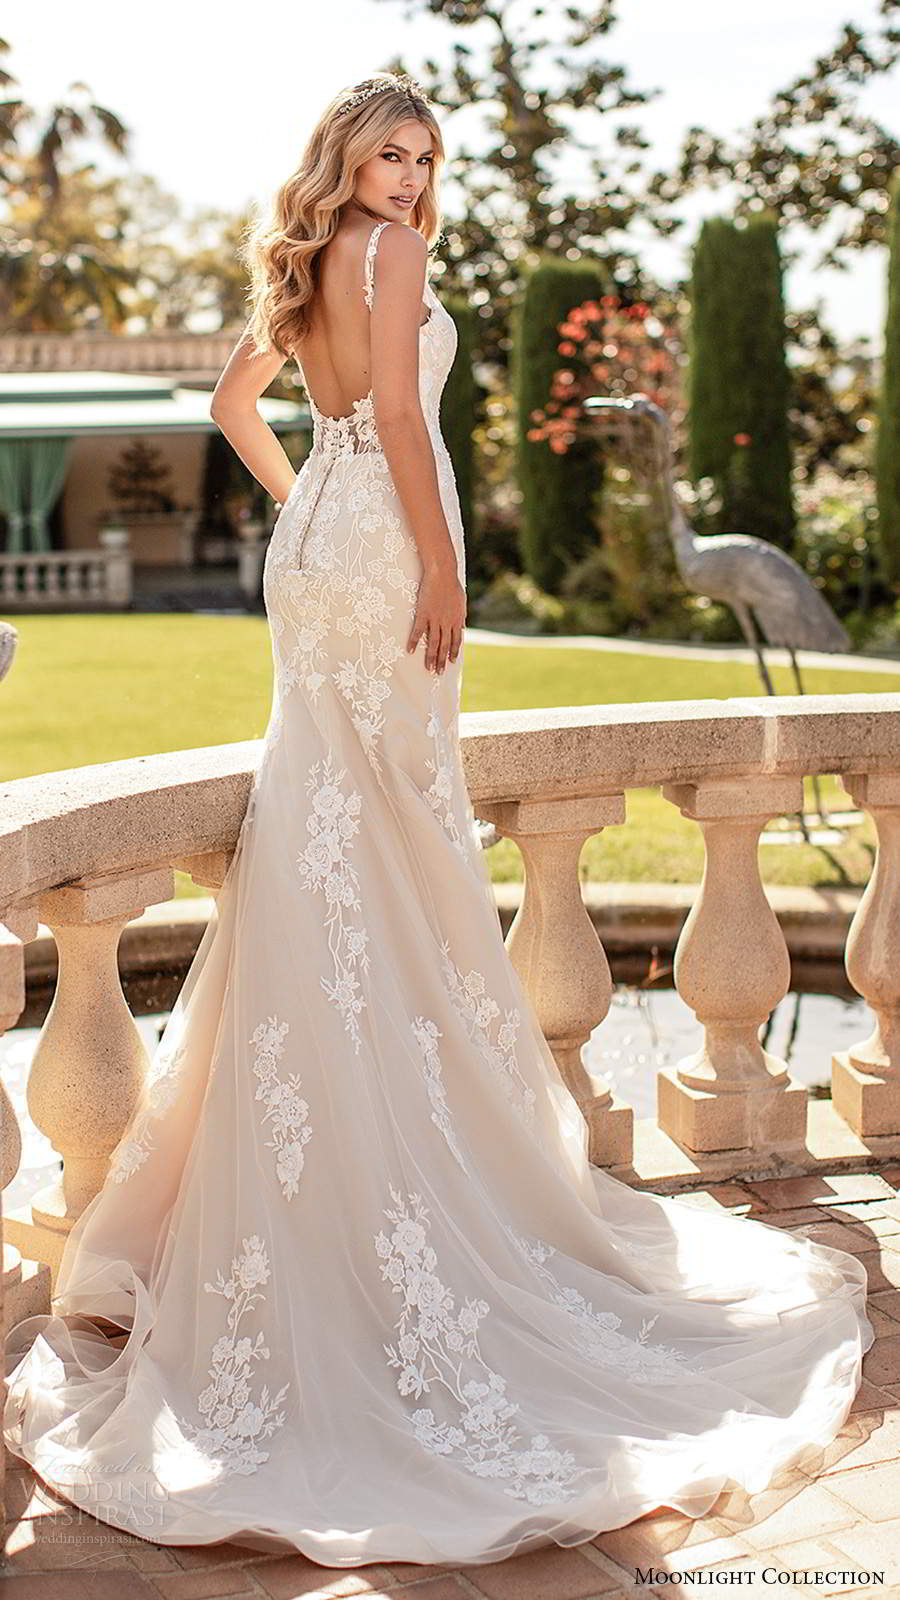 moonlight collection fall 2020 bridal sleeveless thin straps v neckline embellished bodice fit flare sheat a line wedding dress low back chapel train (12) bv